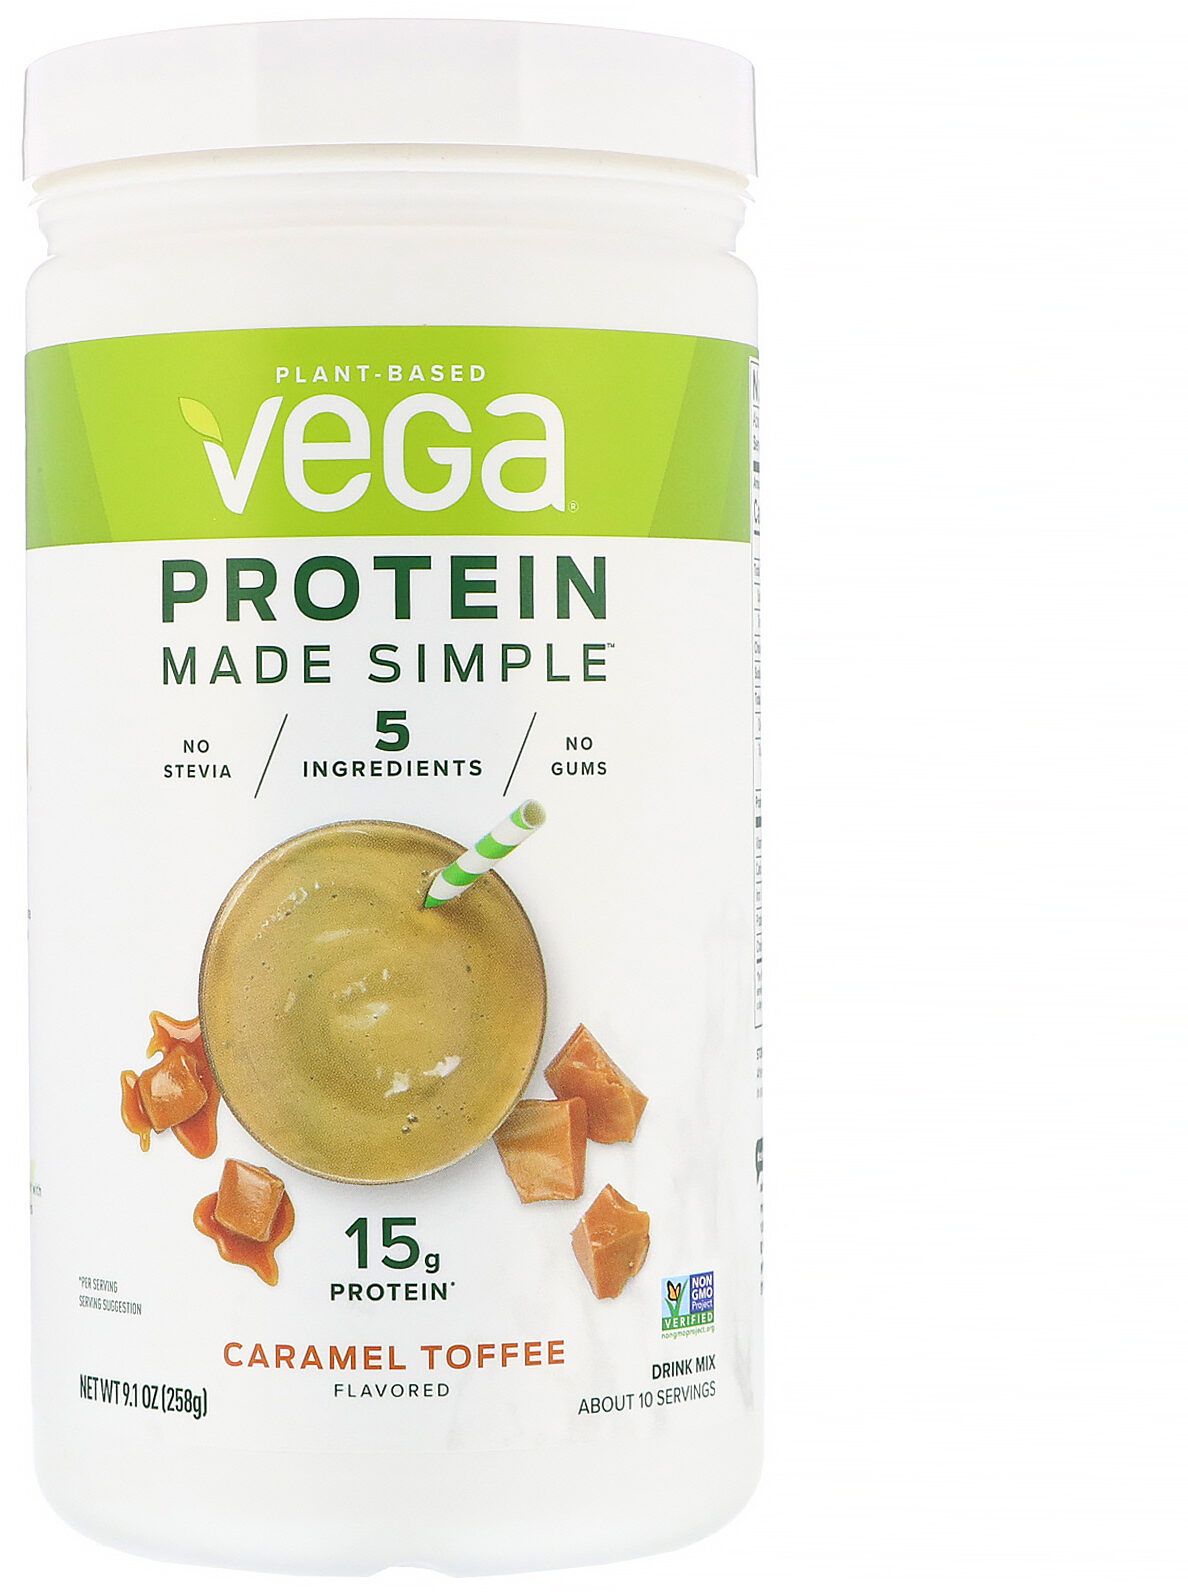 Caramel toffee flavored plant-based protein drink mix - Product